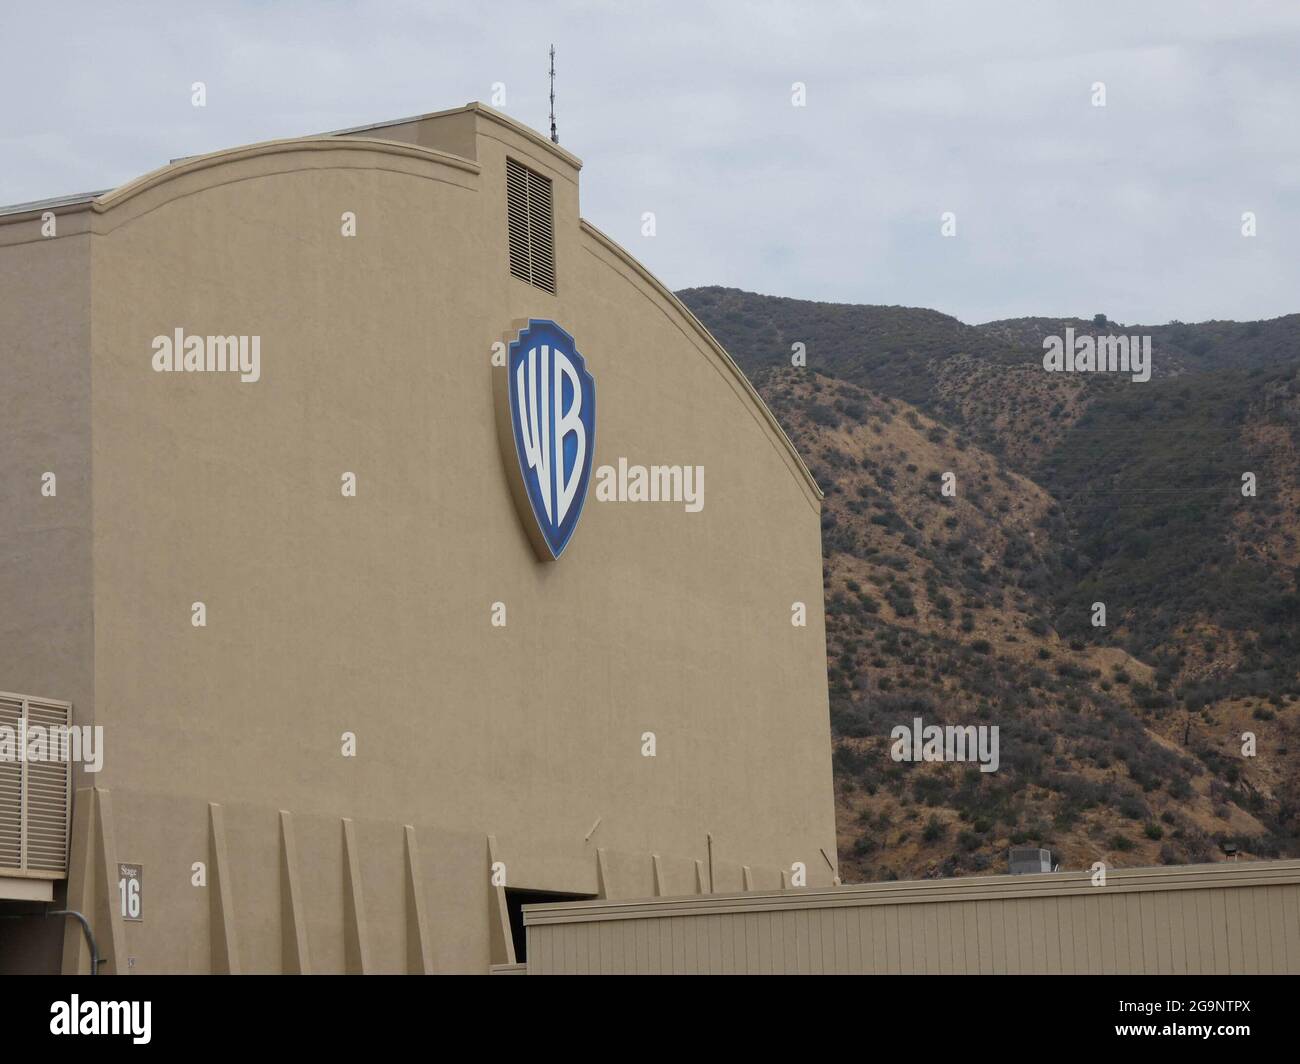 July 26, 2021, California, USA: (NEW) Warner Brothers -- An Iconic Hollywood Studio is in Production Mode Again. July 26, 2021, Burbank, California, USA: One of the ''Big Five'' Mega Studios that form the backbone of the American Film and Television Industry, Warner Brothers Studios is in full production mode again, and regular tours have resumed. With 2020-2021 Warner Bros blockbusters such as Tenet, Godzilla vs Kong, and Mortal Kombat raking in combined HBO Max Streaming as well as theatrical revenues exceeding $1B for the last twelve months, Warner Bros Studios is positioned to lead a roar Stock Photo